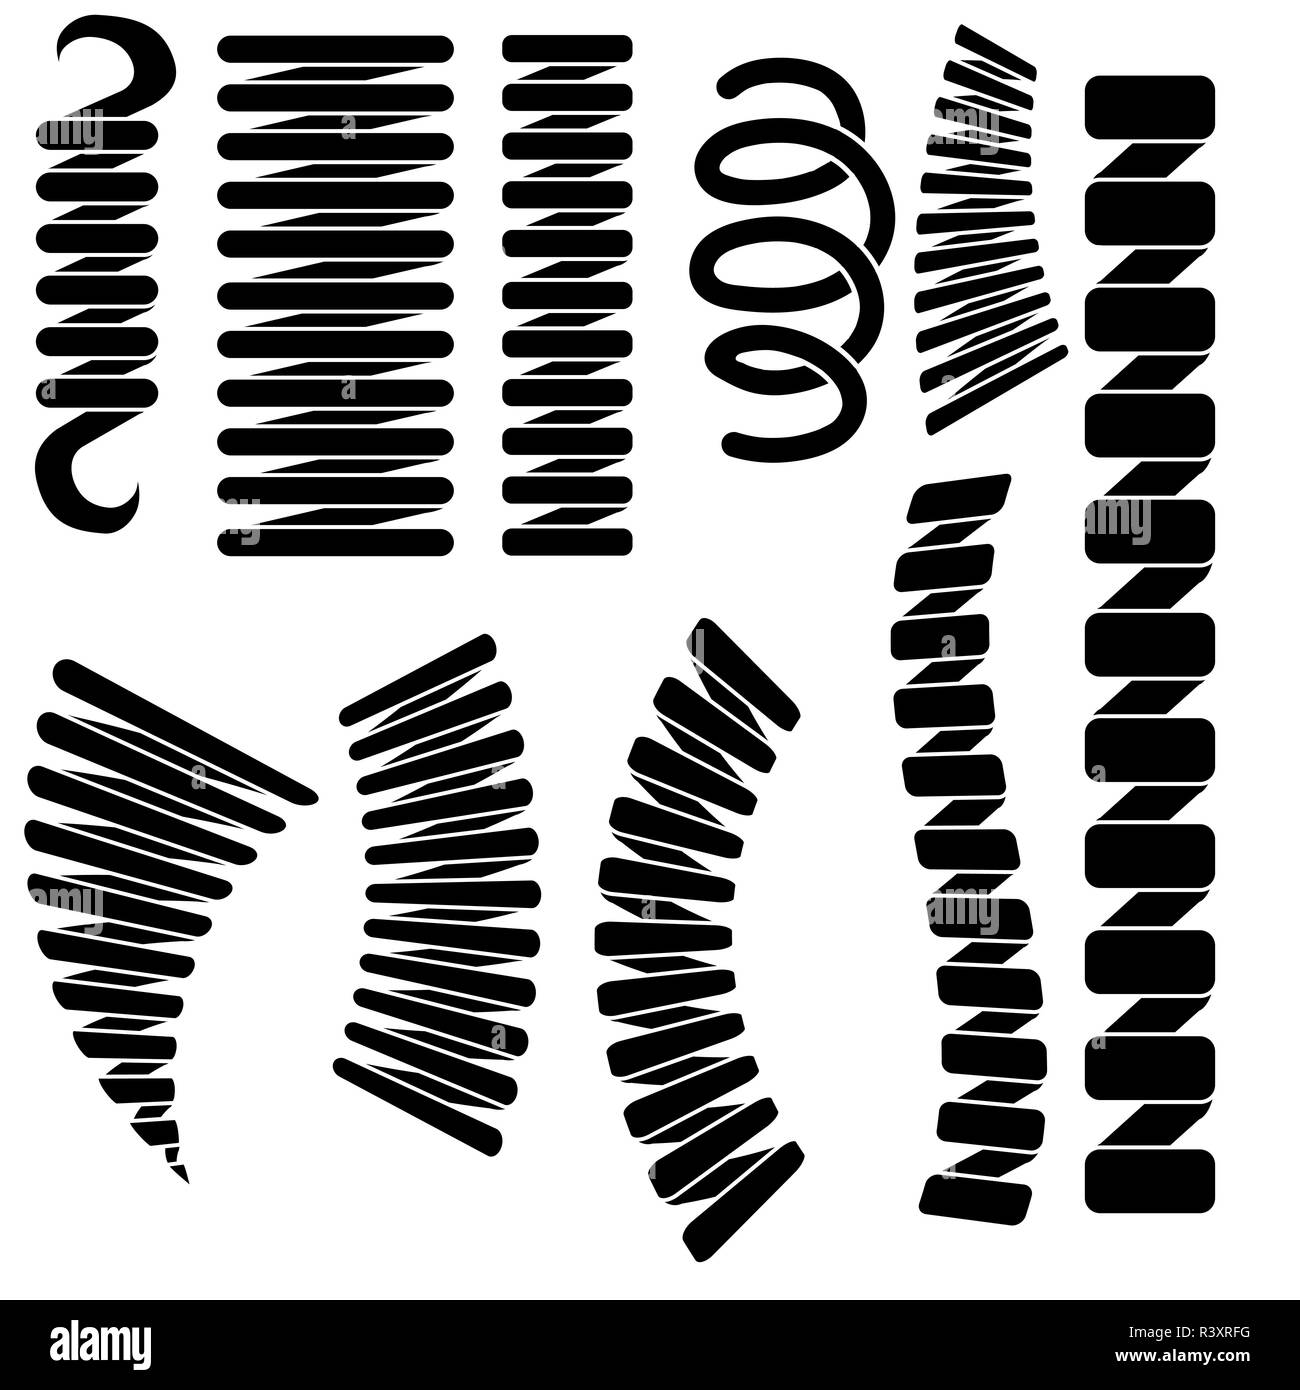 Set of Springs Silhouettes Stock Photo